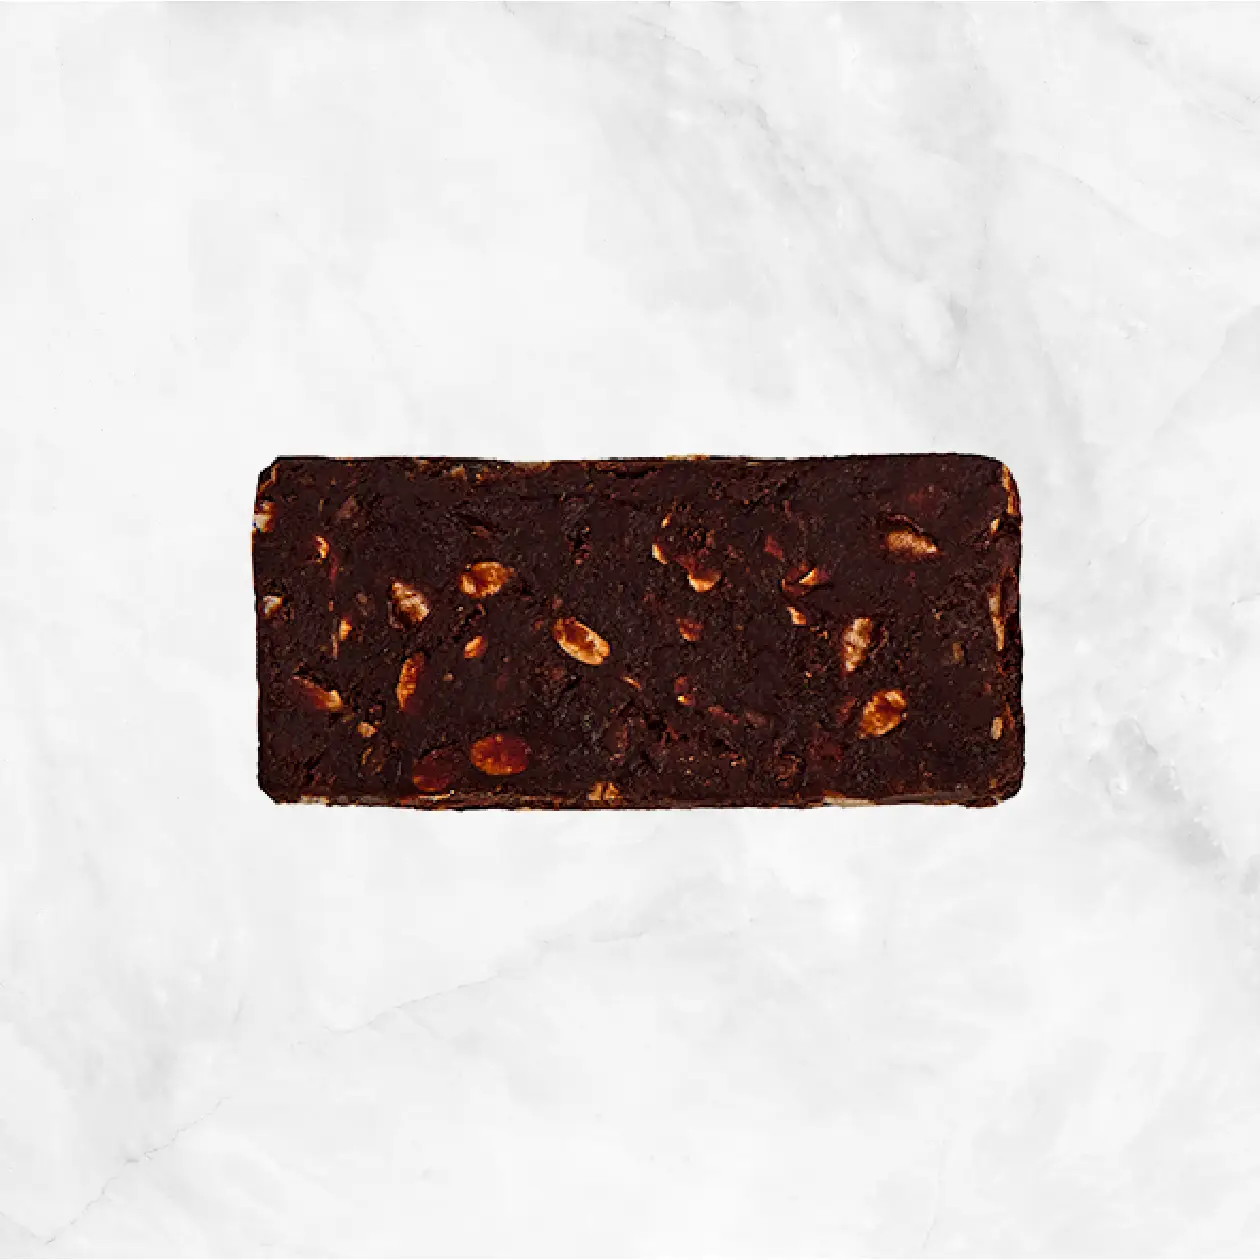 Dirtbag Chewy Chocolate Date Bar Delivery